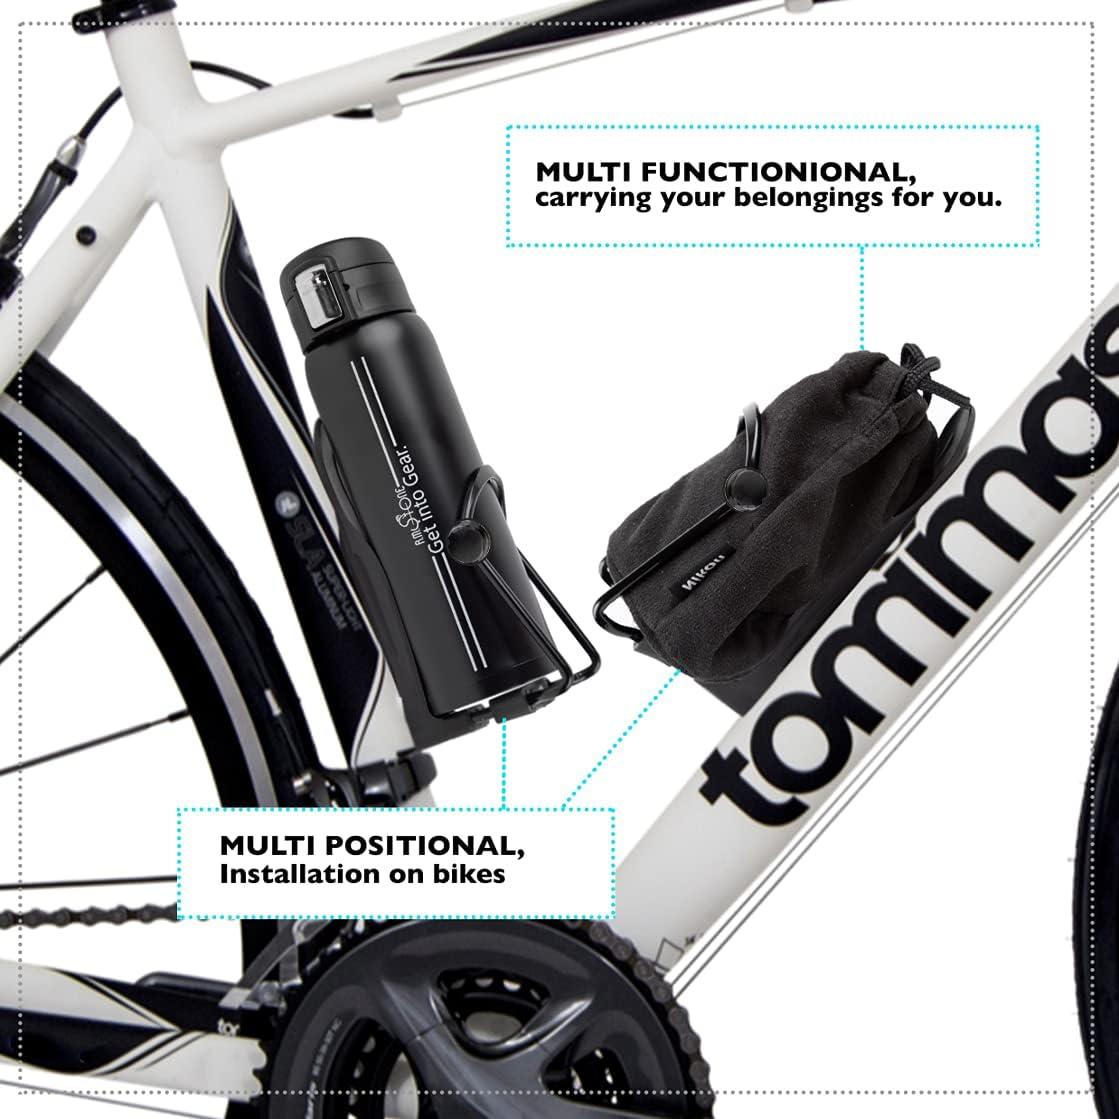 The Sixer Insulated Bike Bottle Holder - The Spotted Door